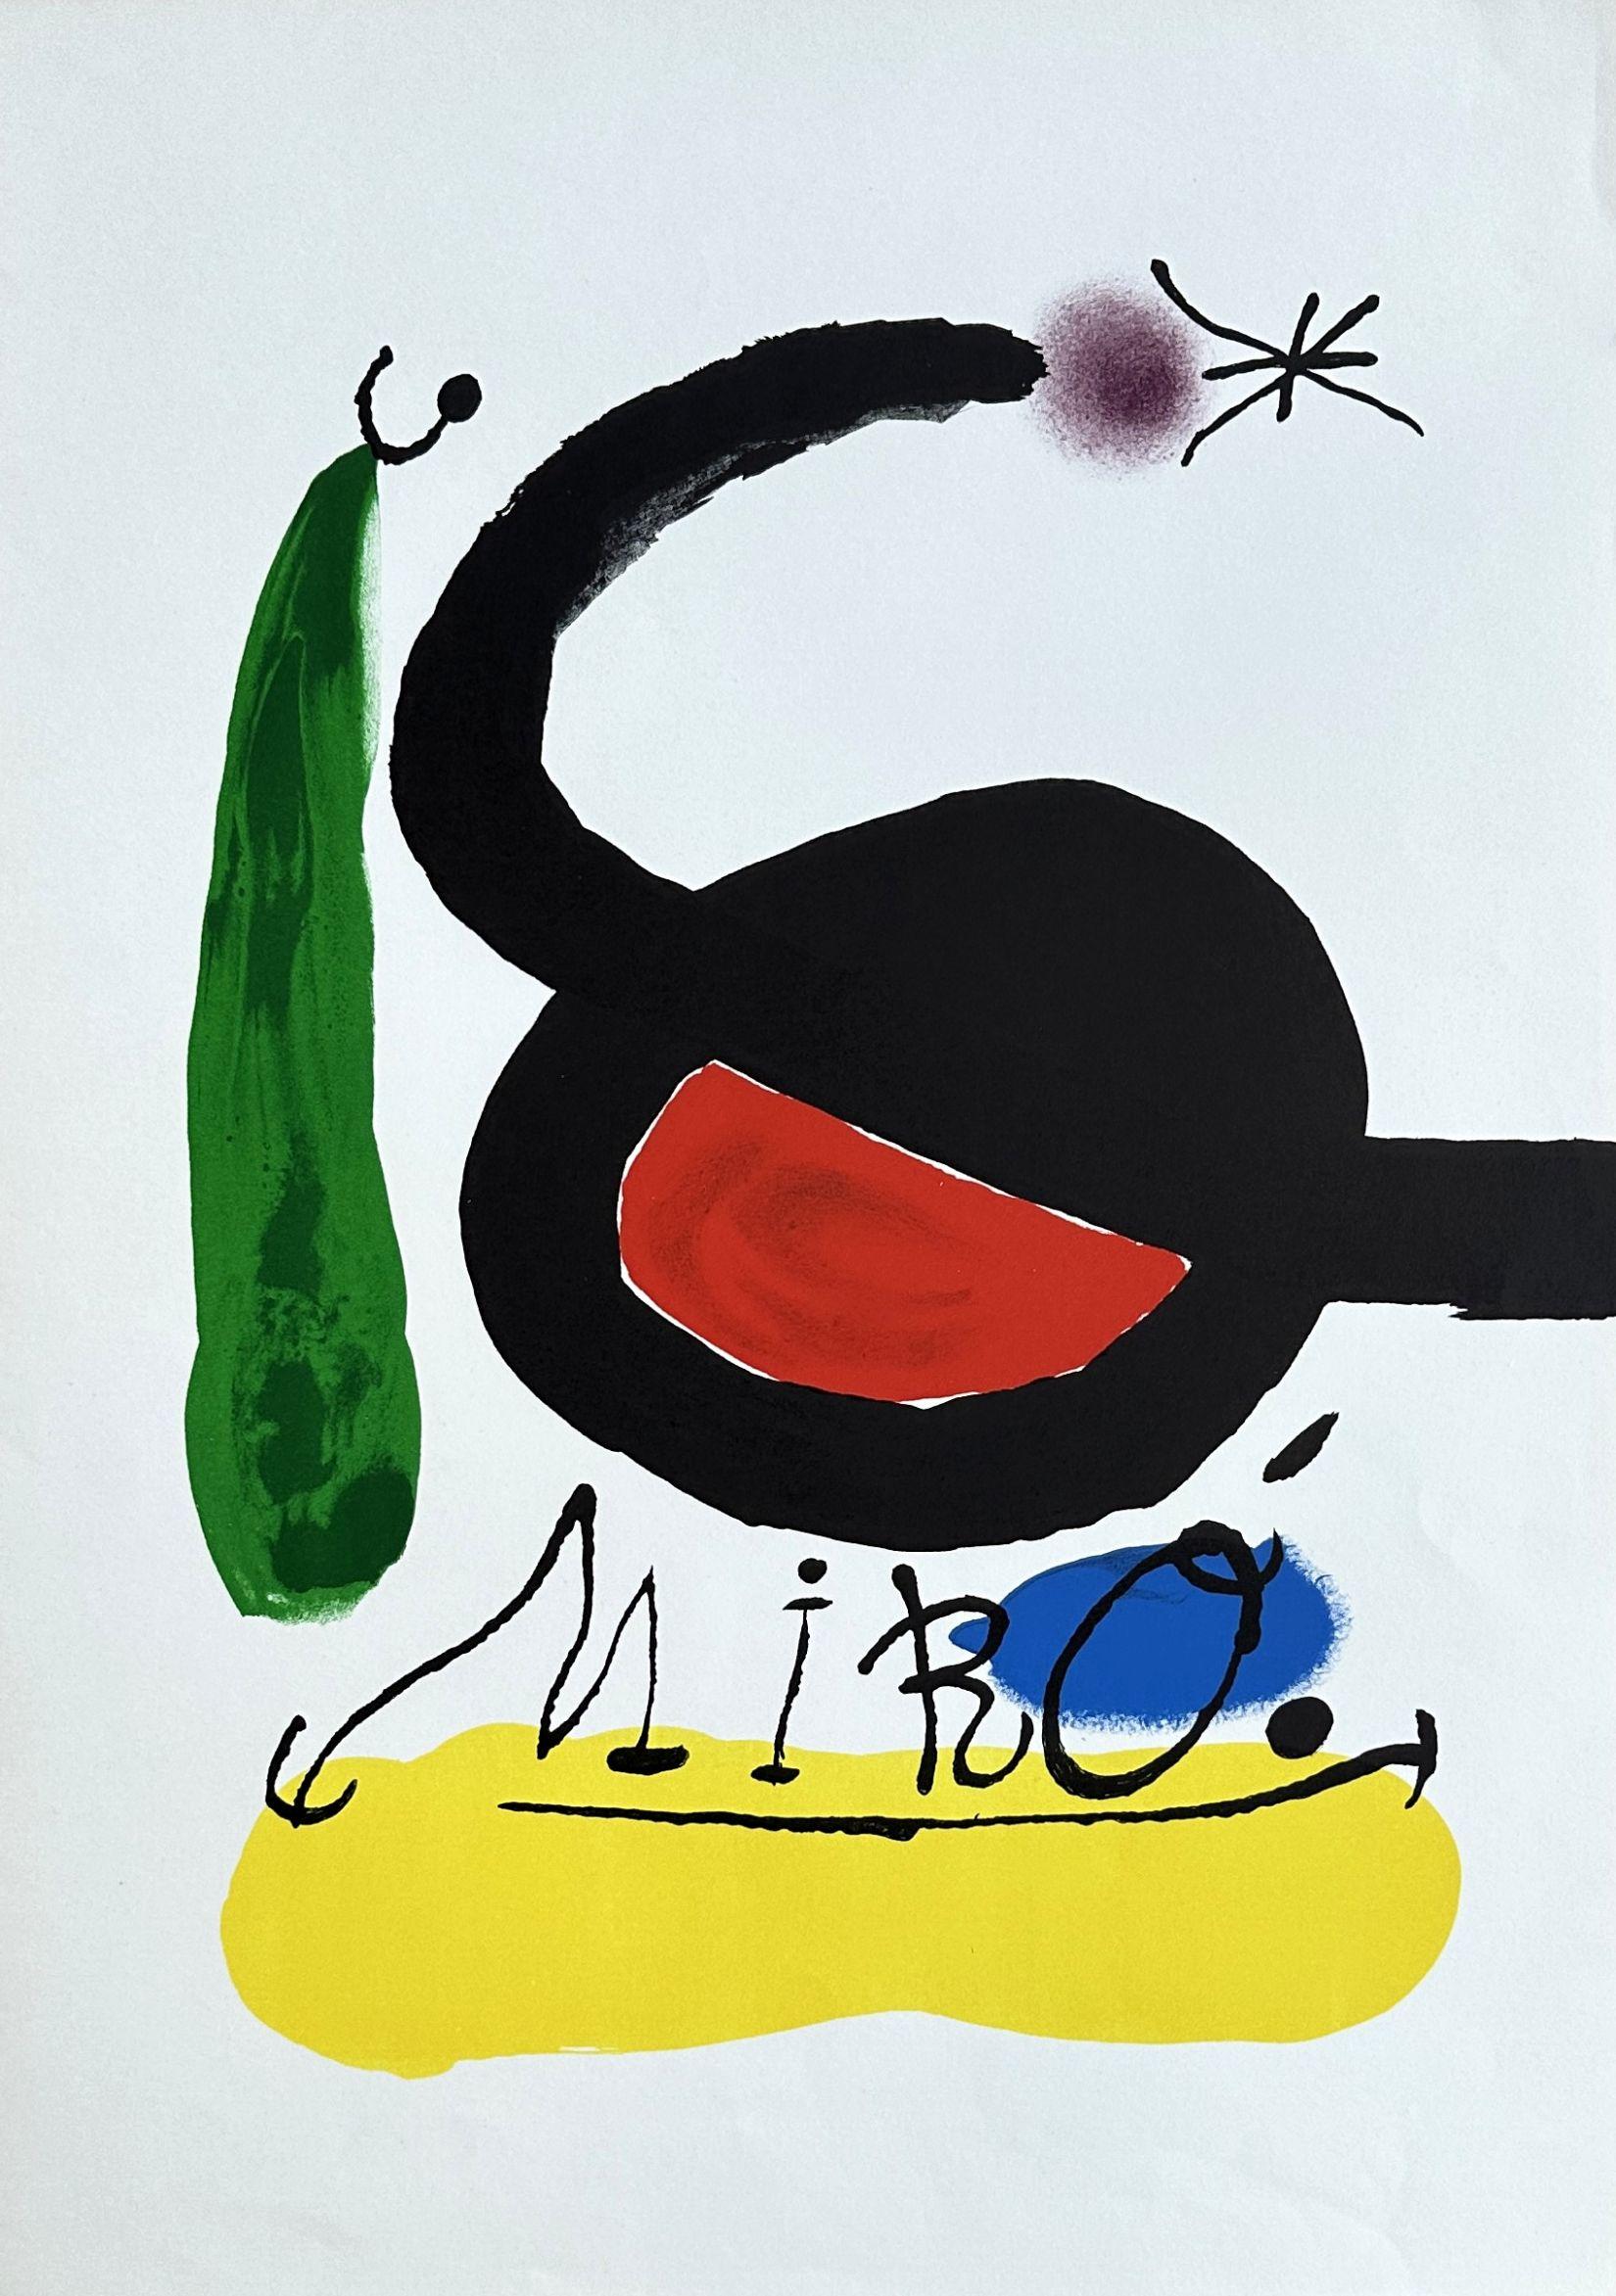 Joan Miró Abstract Print - Surrealist Bird - Colors Lithograph Signed in the Plate - 1971